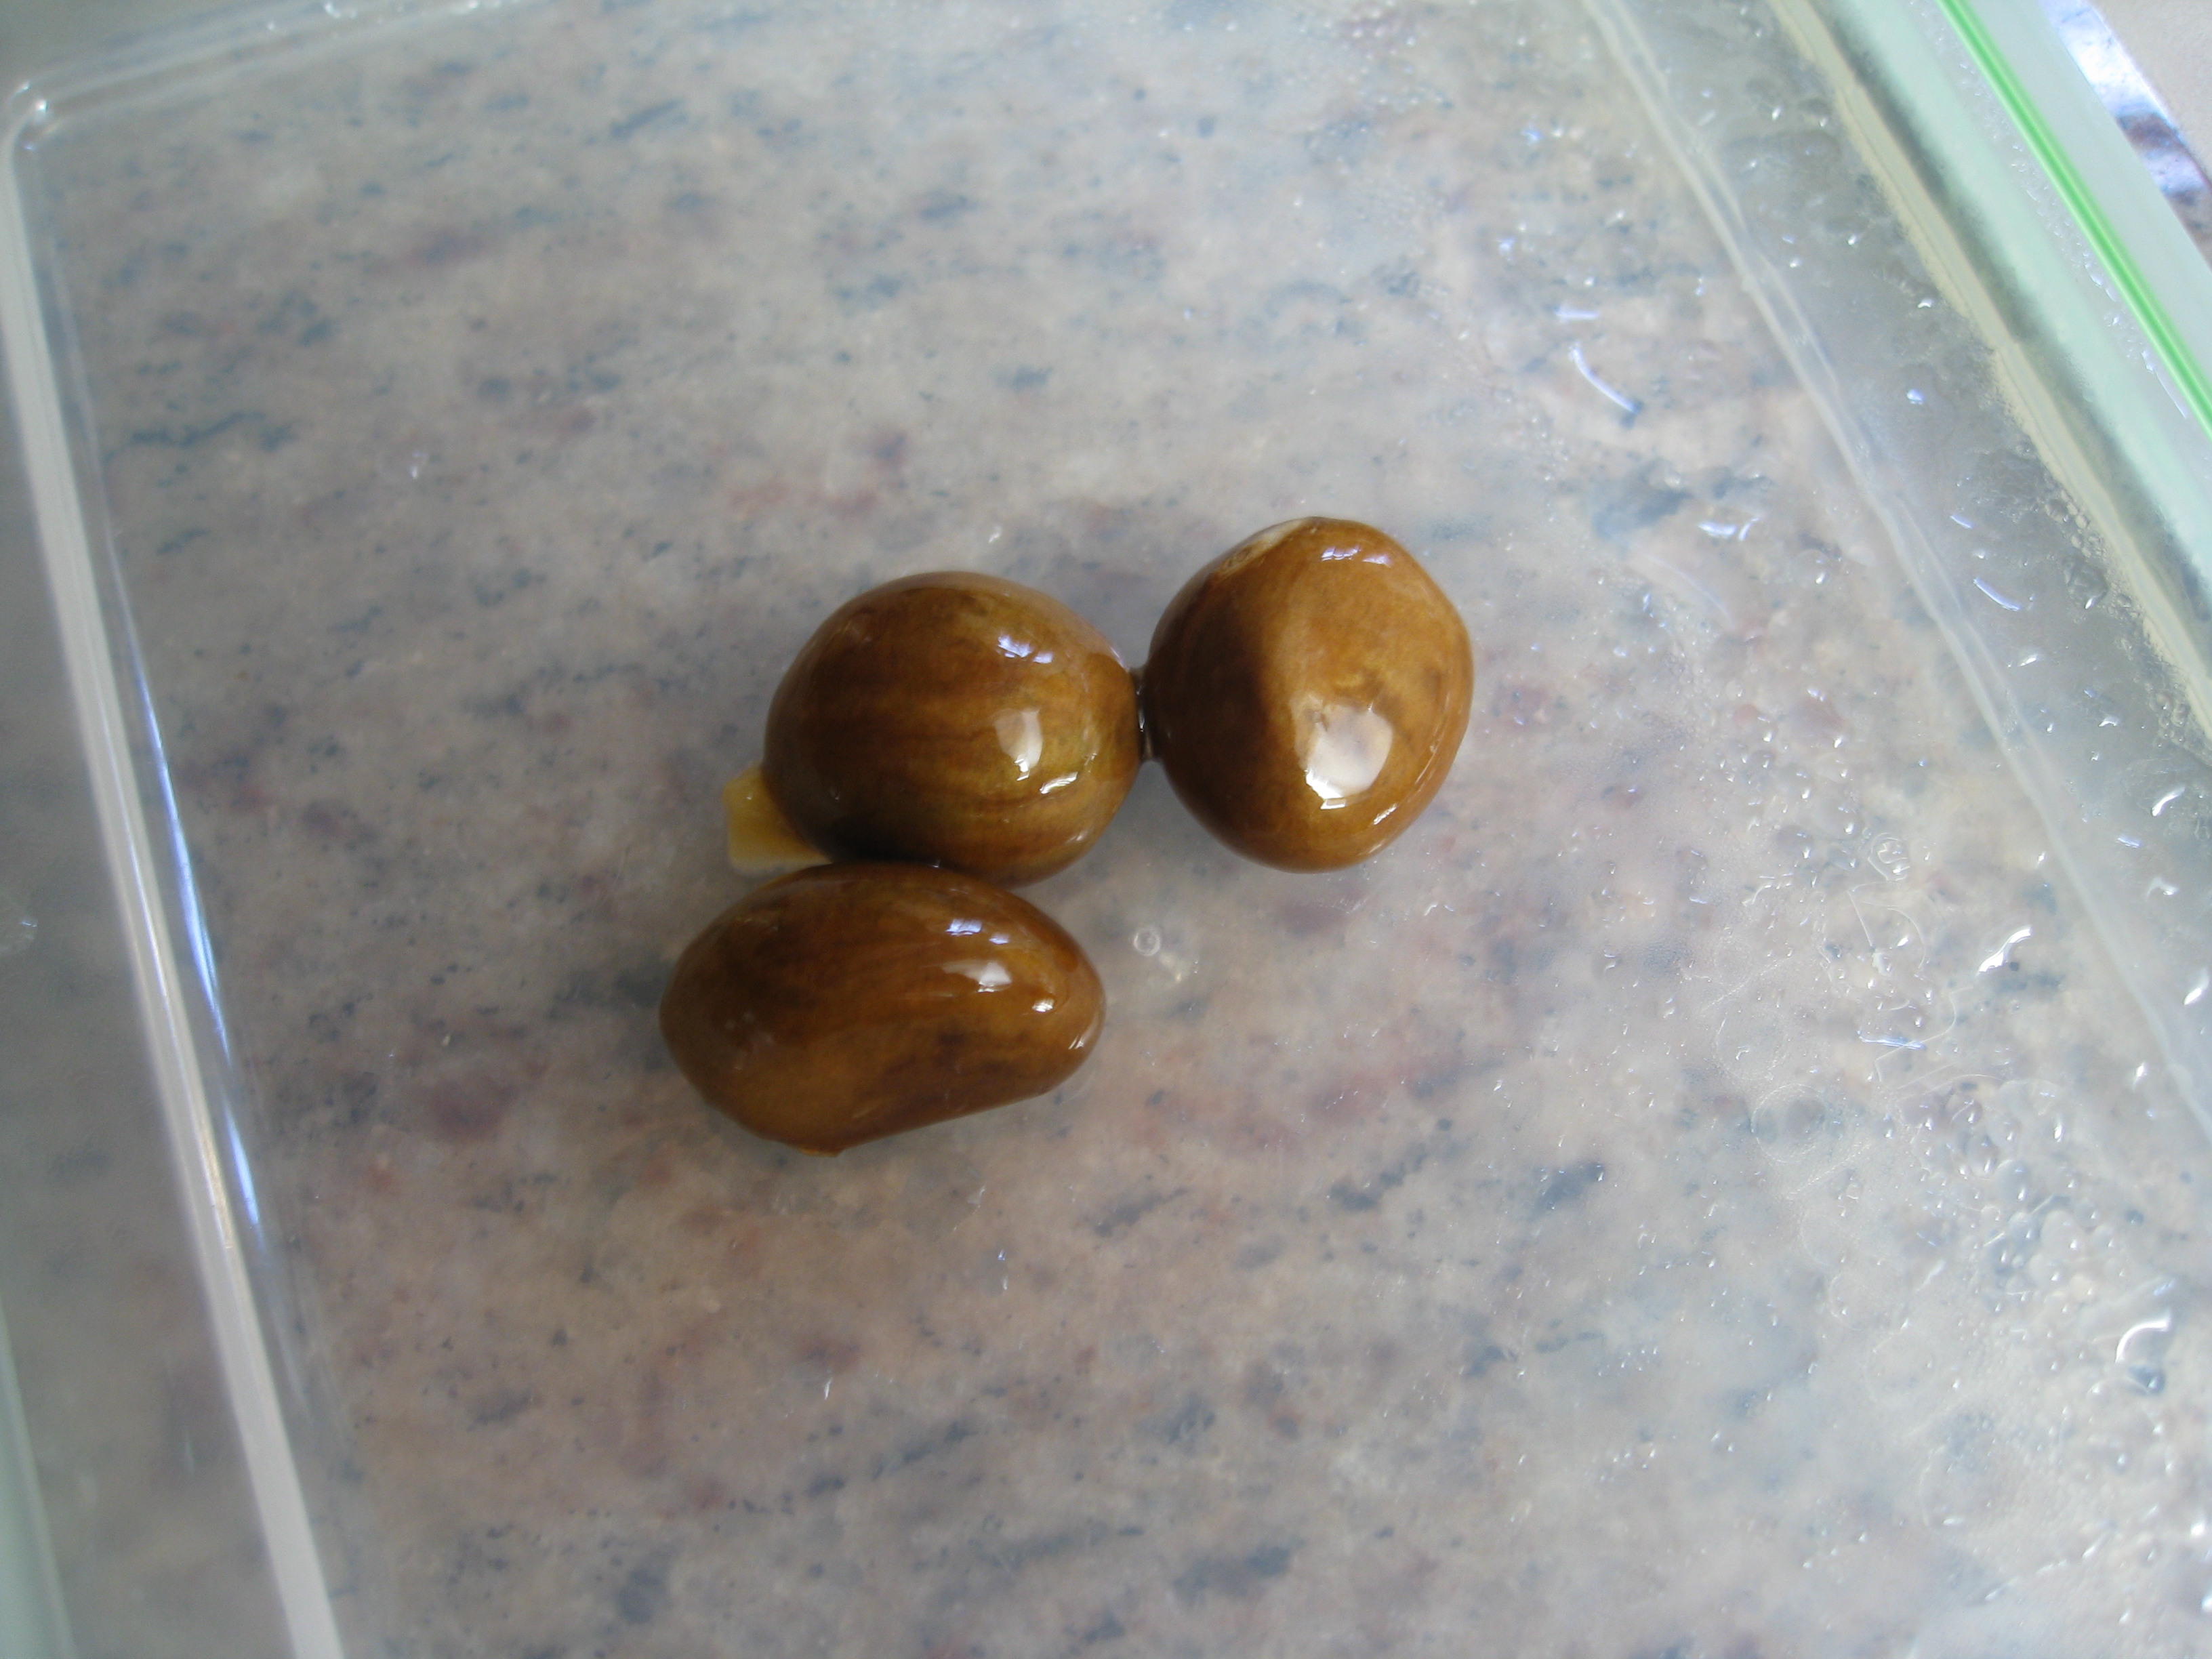 Loquat seeds are about 1/2 an inch across, with several in each piece of fruit.